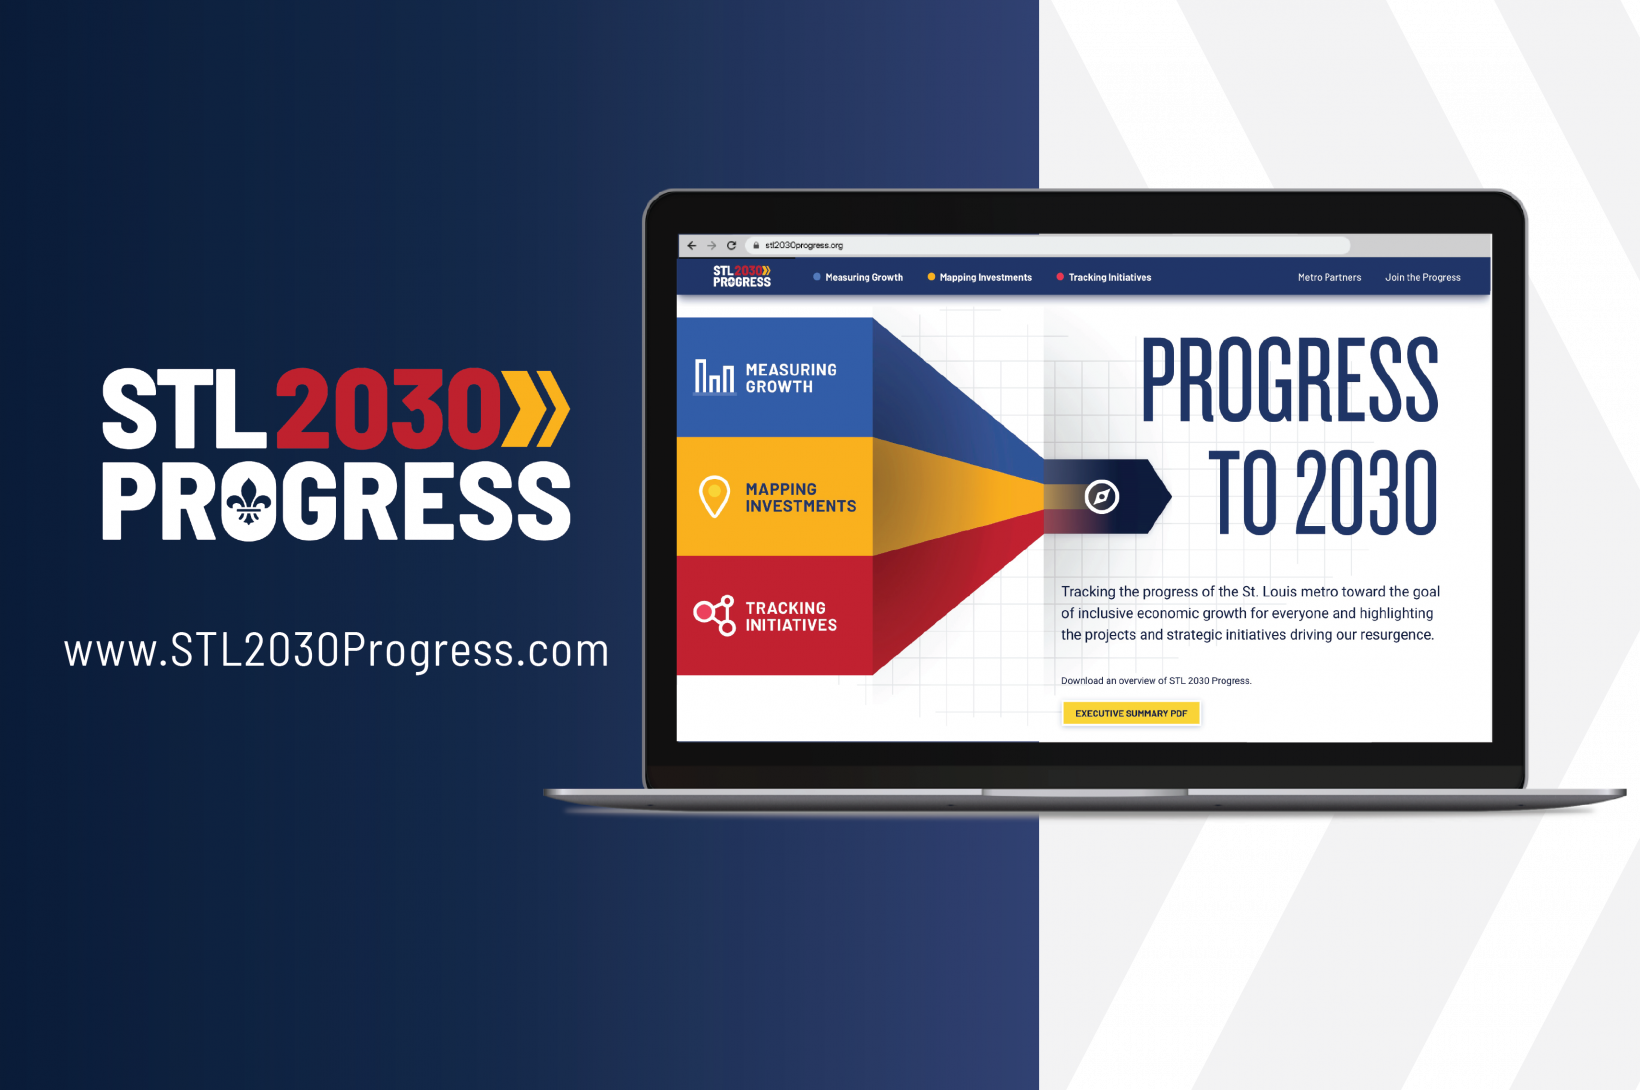 STL 2030 Progress Logo with an image of a laptop 